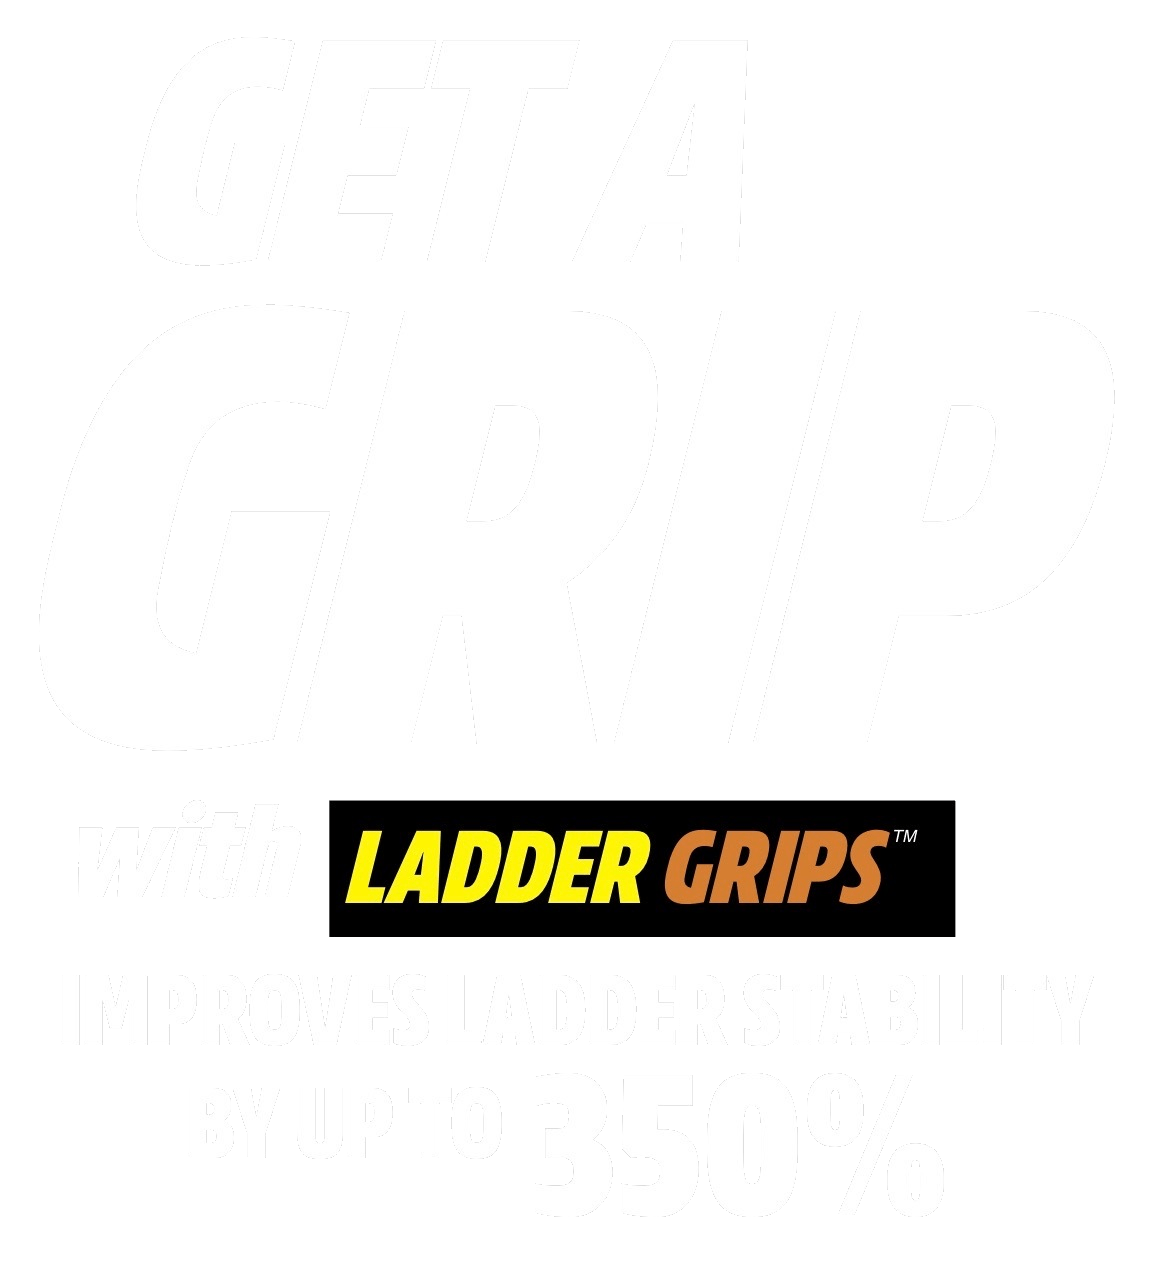 Get a Grip with Ladder Grips